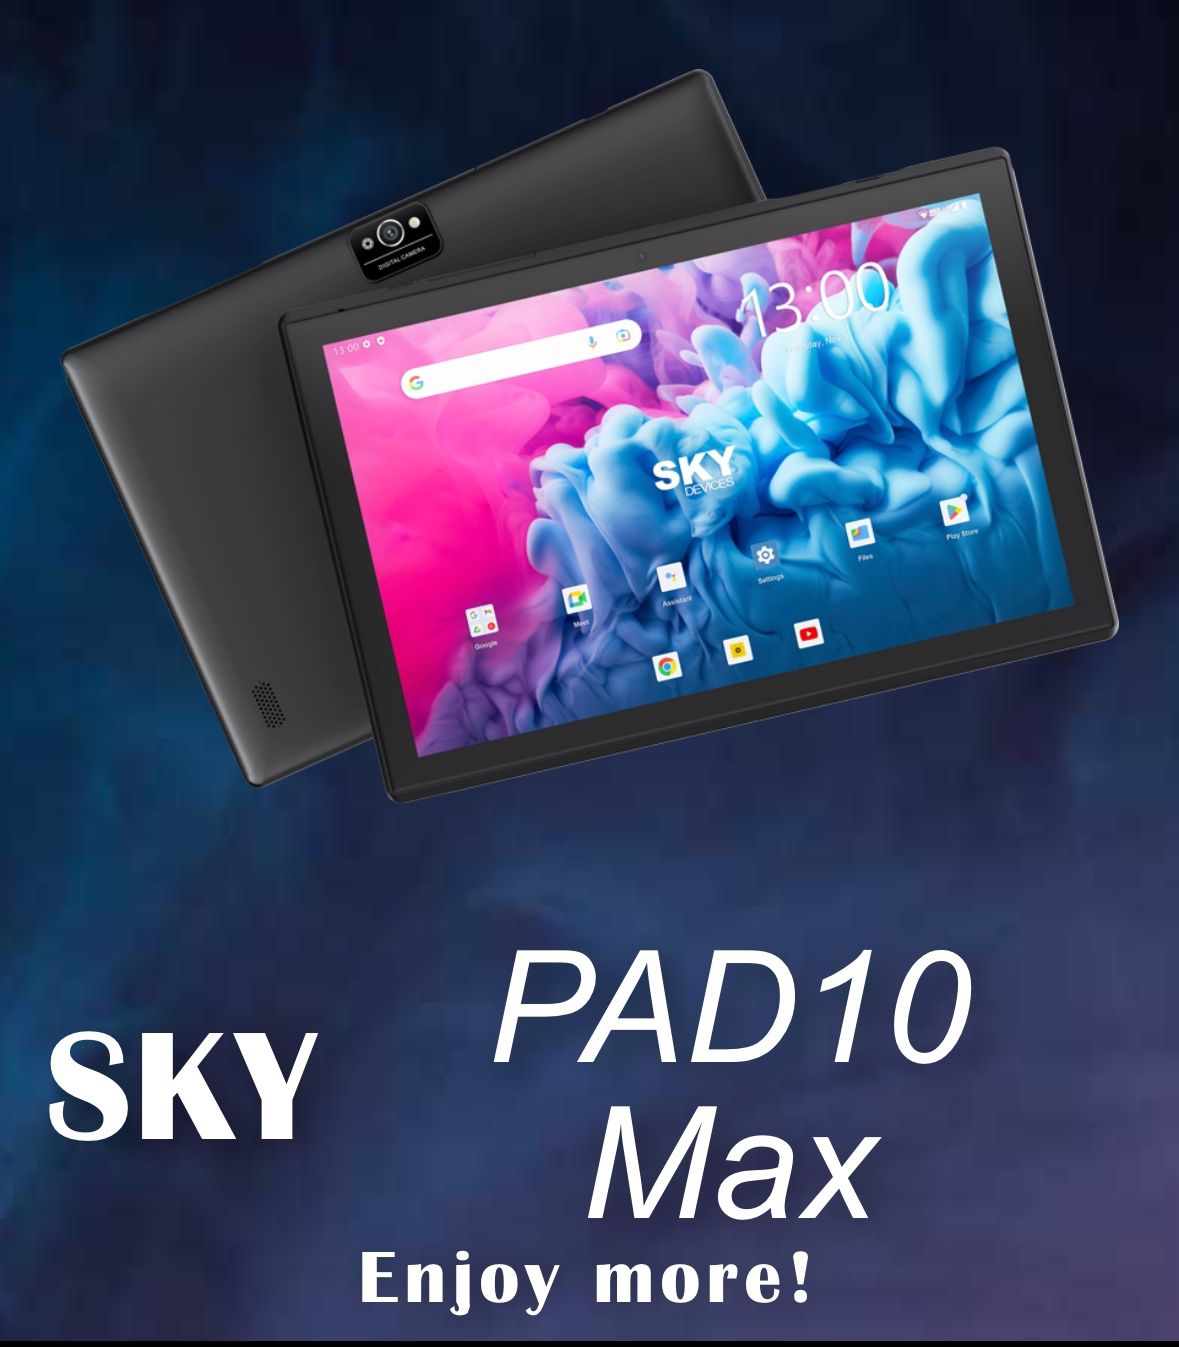 SKY Devices SKY Pad 10 MAX Tablet (Unlocked) - 64GB, 10.1", Android, 4G LTE+WiFiSKY Devices SKY Pad 10 MAX Tablet (Unlocked) - 64GB, 10.1", Android, 4